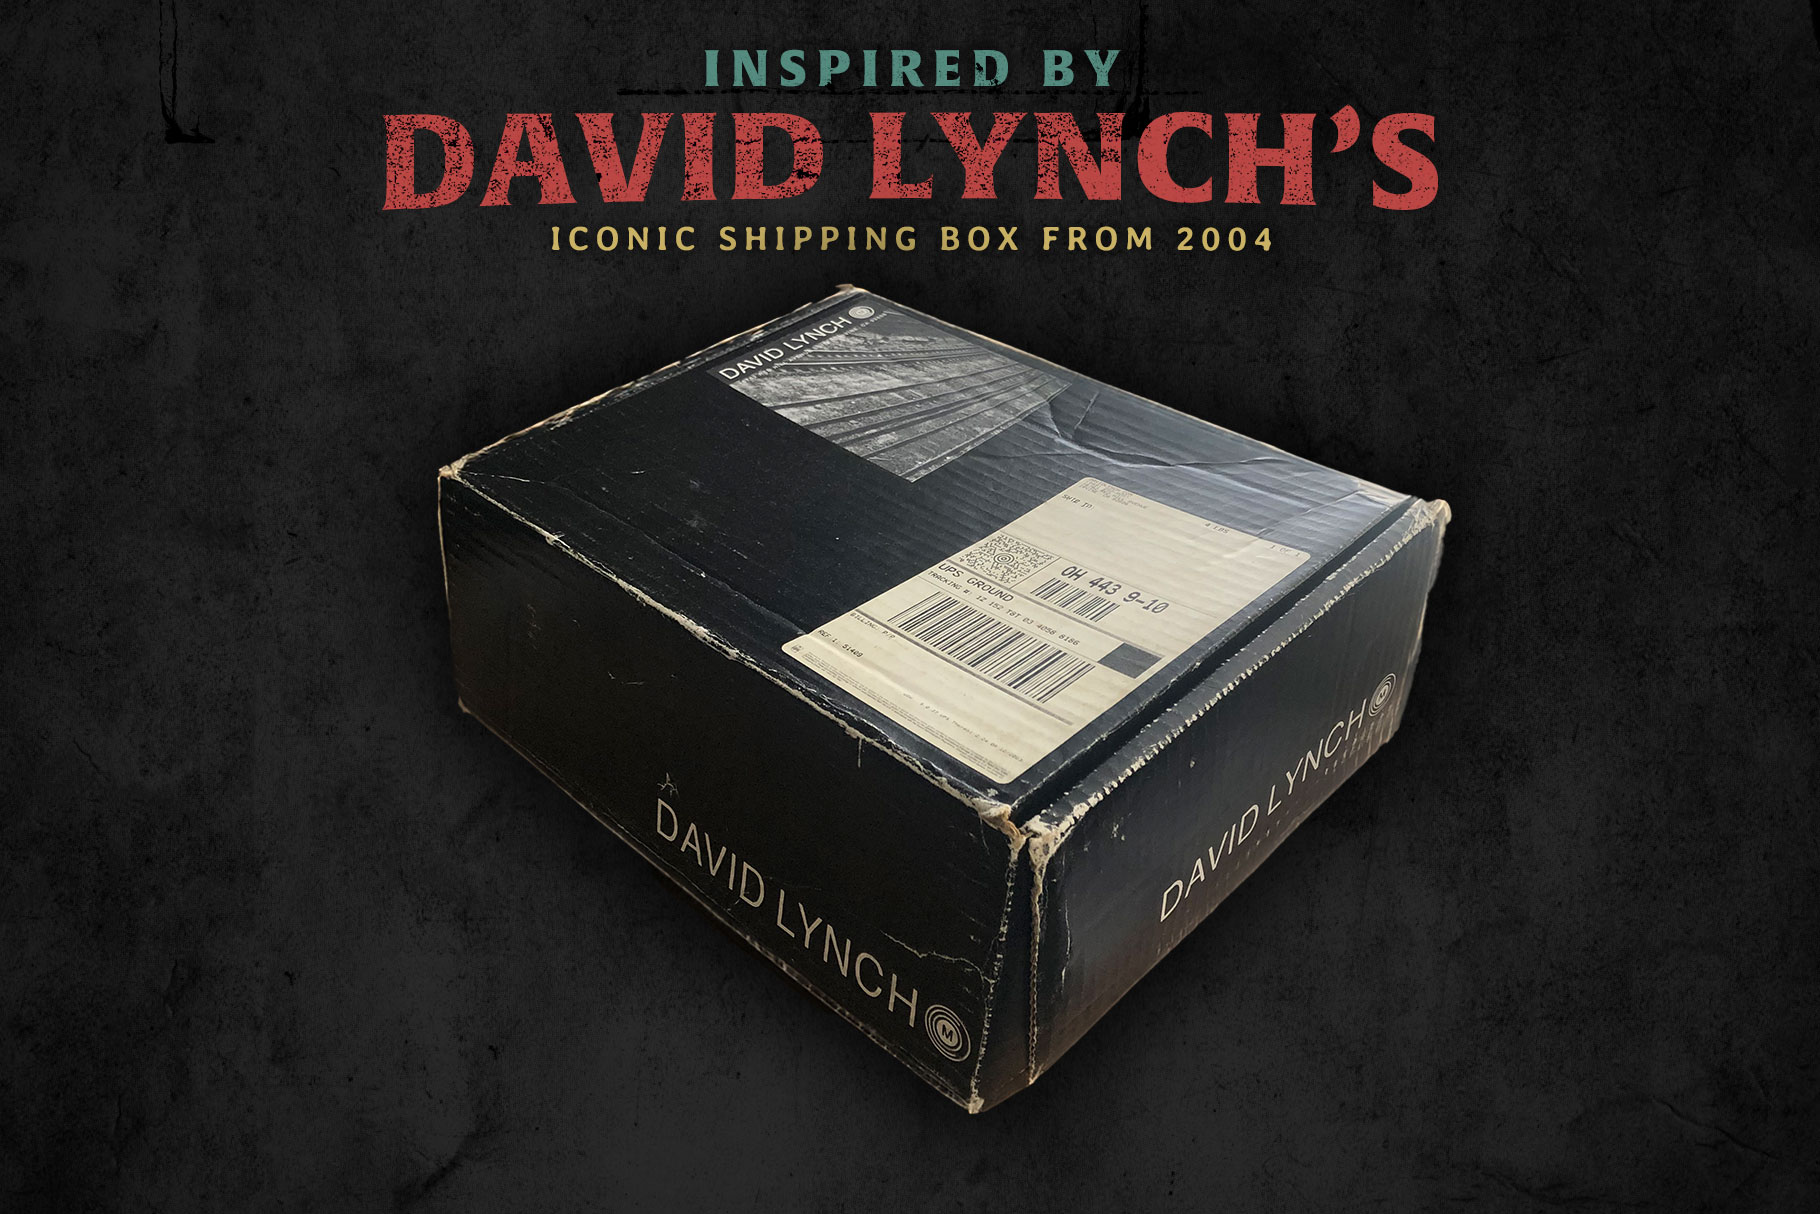 Aged Black Cardboard Textures - Inspired by David Lynch's Iconic Shipping Box from 2004